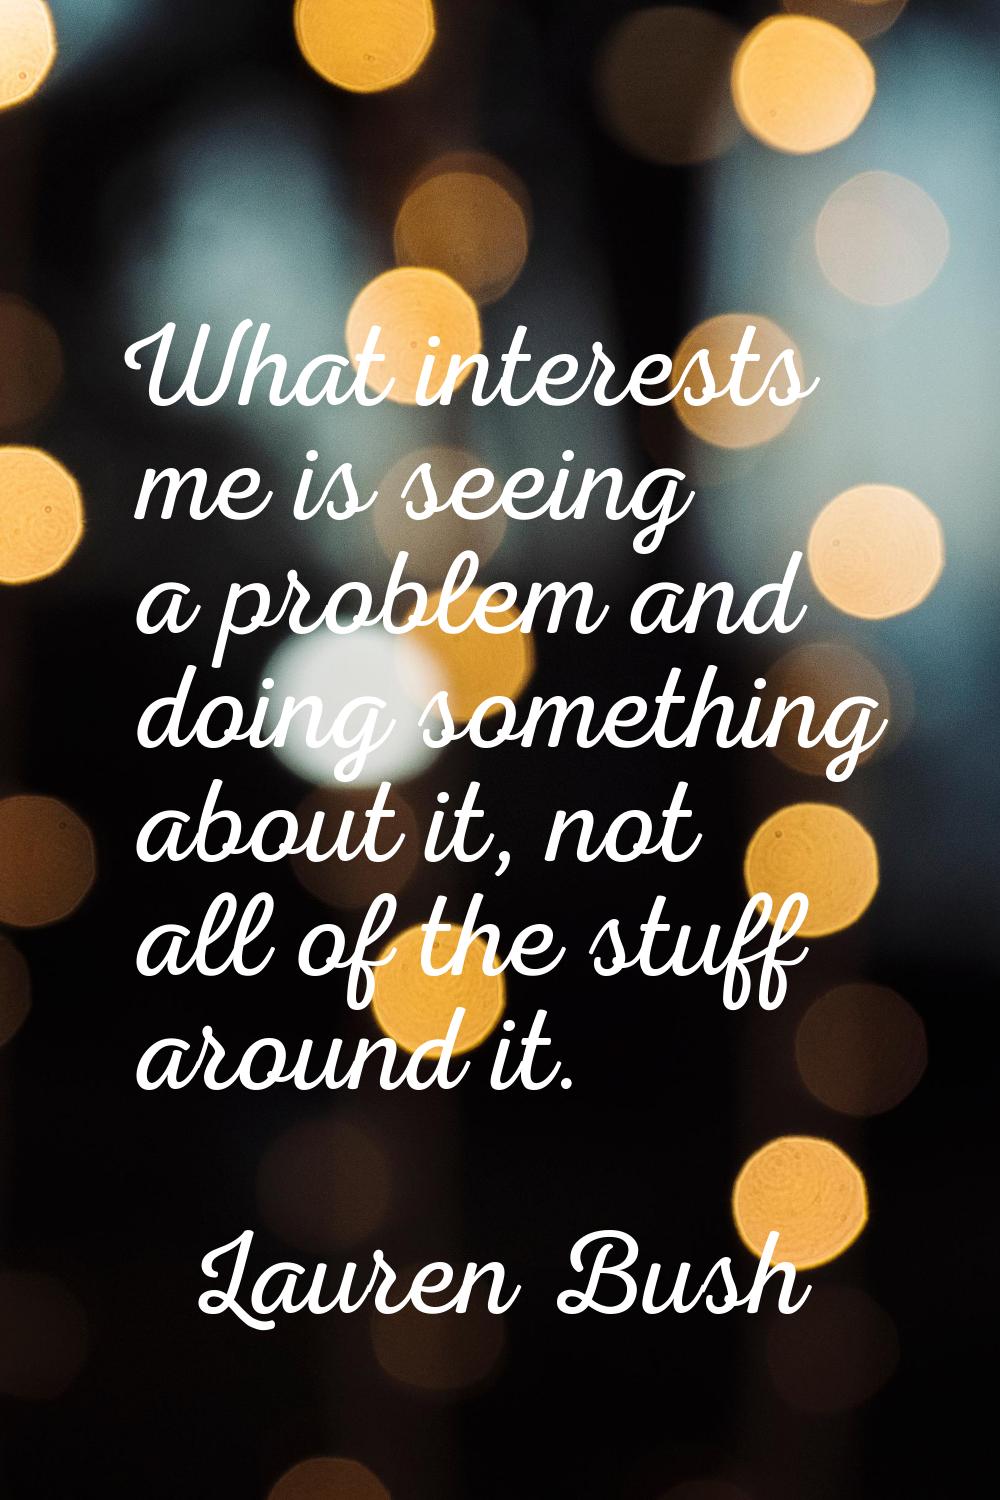 What interests me is seeing a problem and doing something about it, not all of the stuff around it.